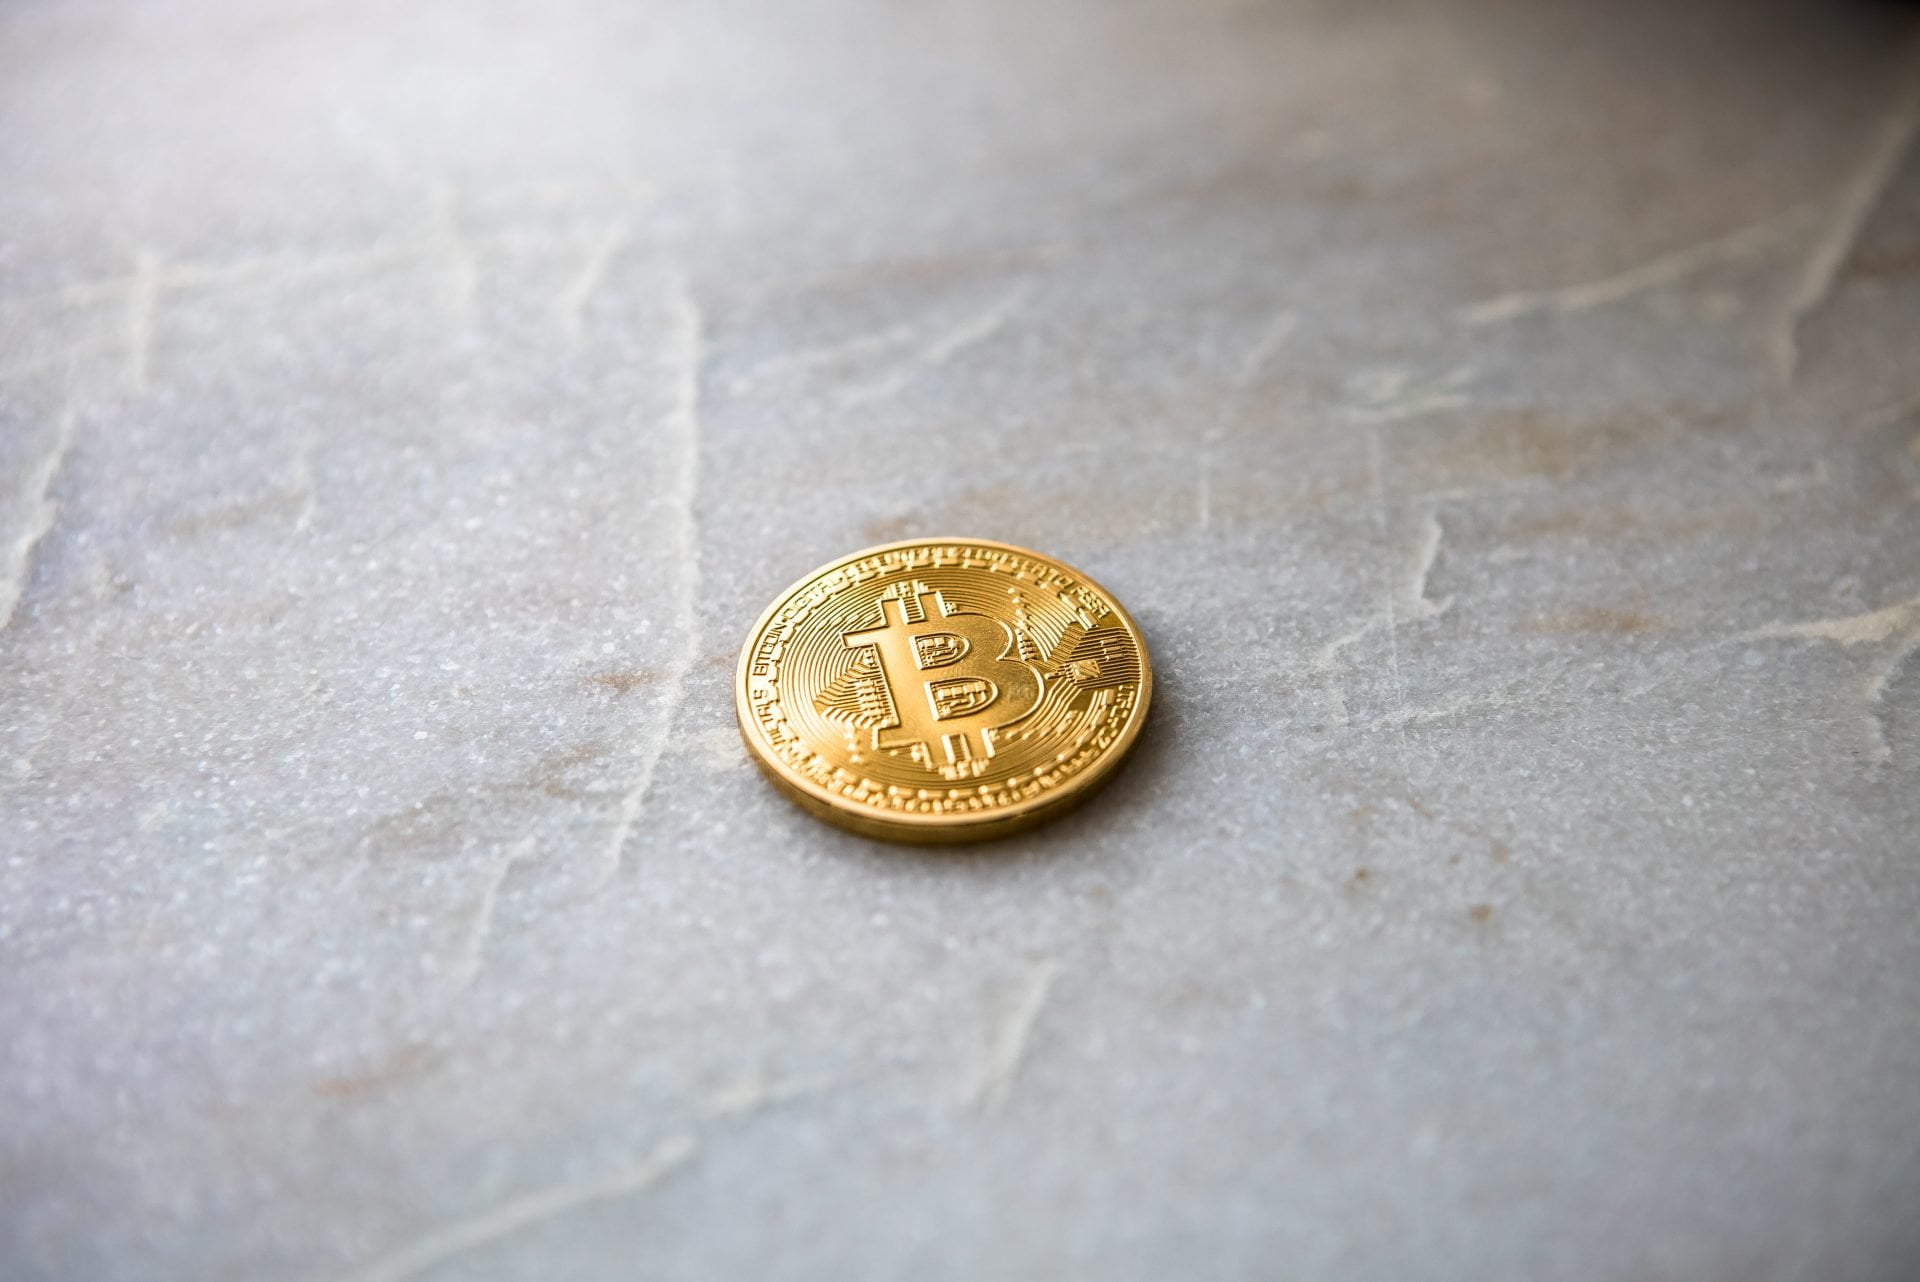 Institutional Bitcoin Interest Wanes as BTC Price Falls Under $10,000 20